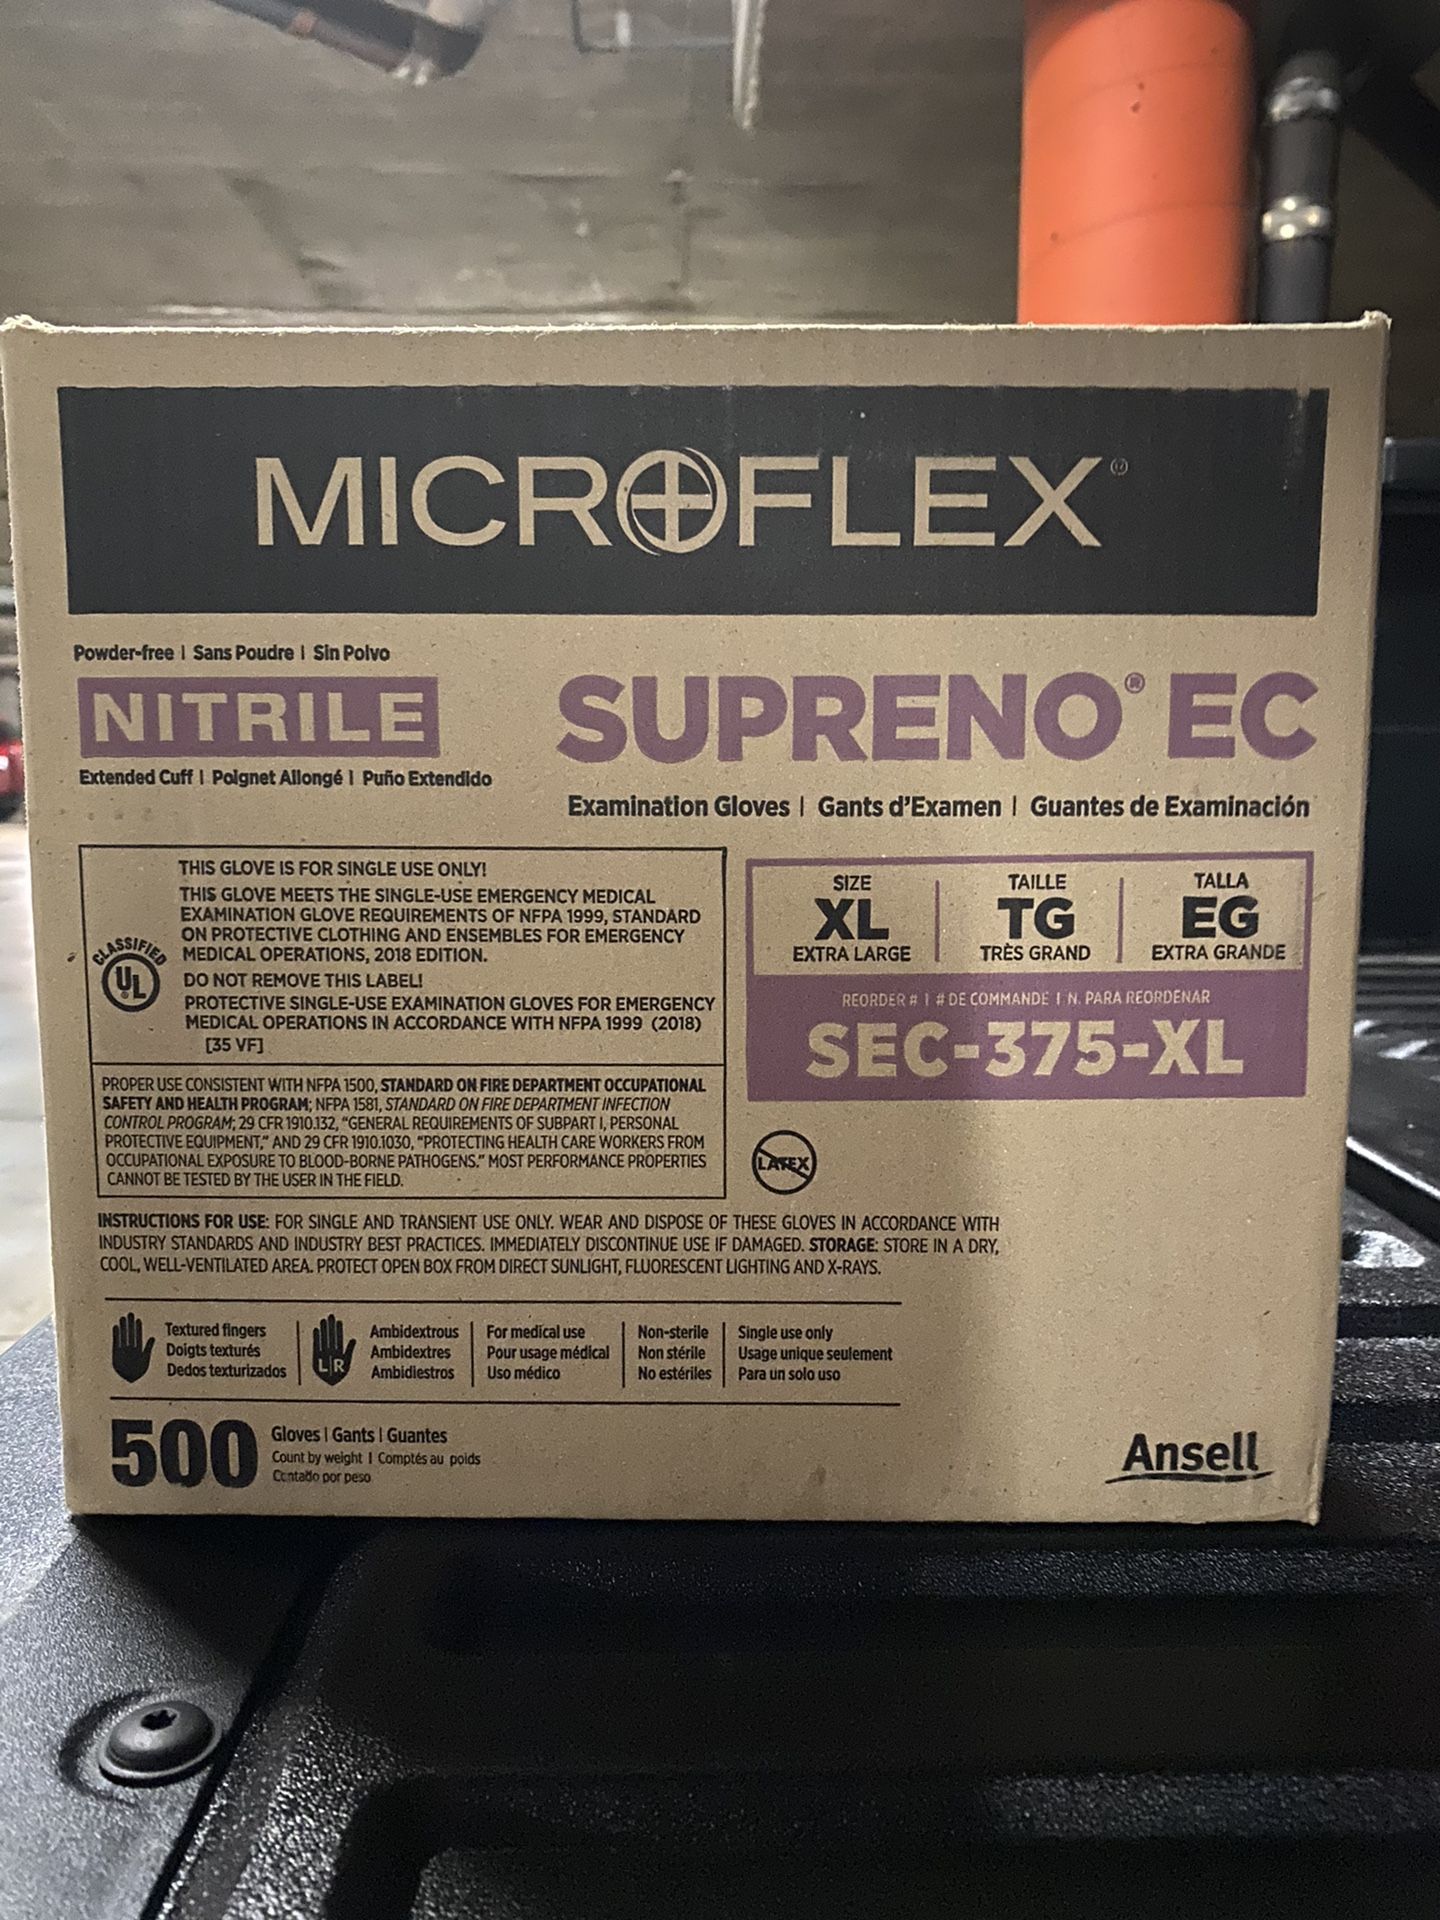 Microflex boxe a gloves is 10 boxes inside